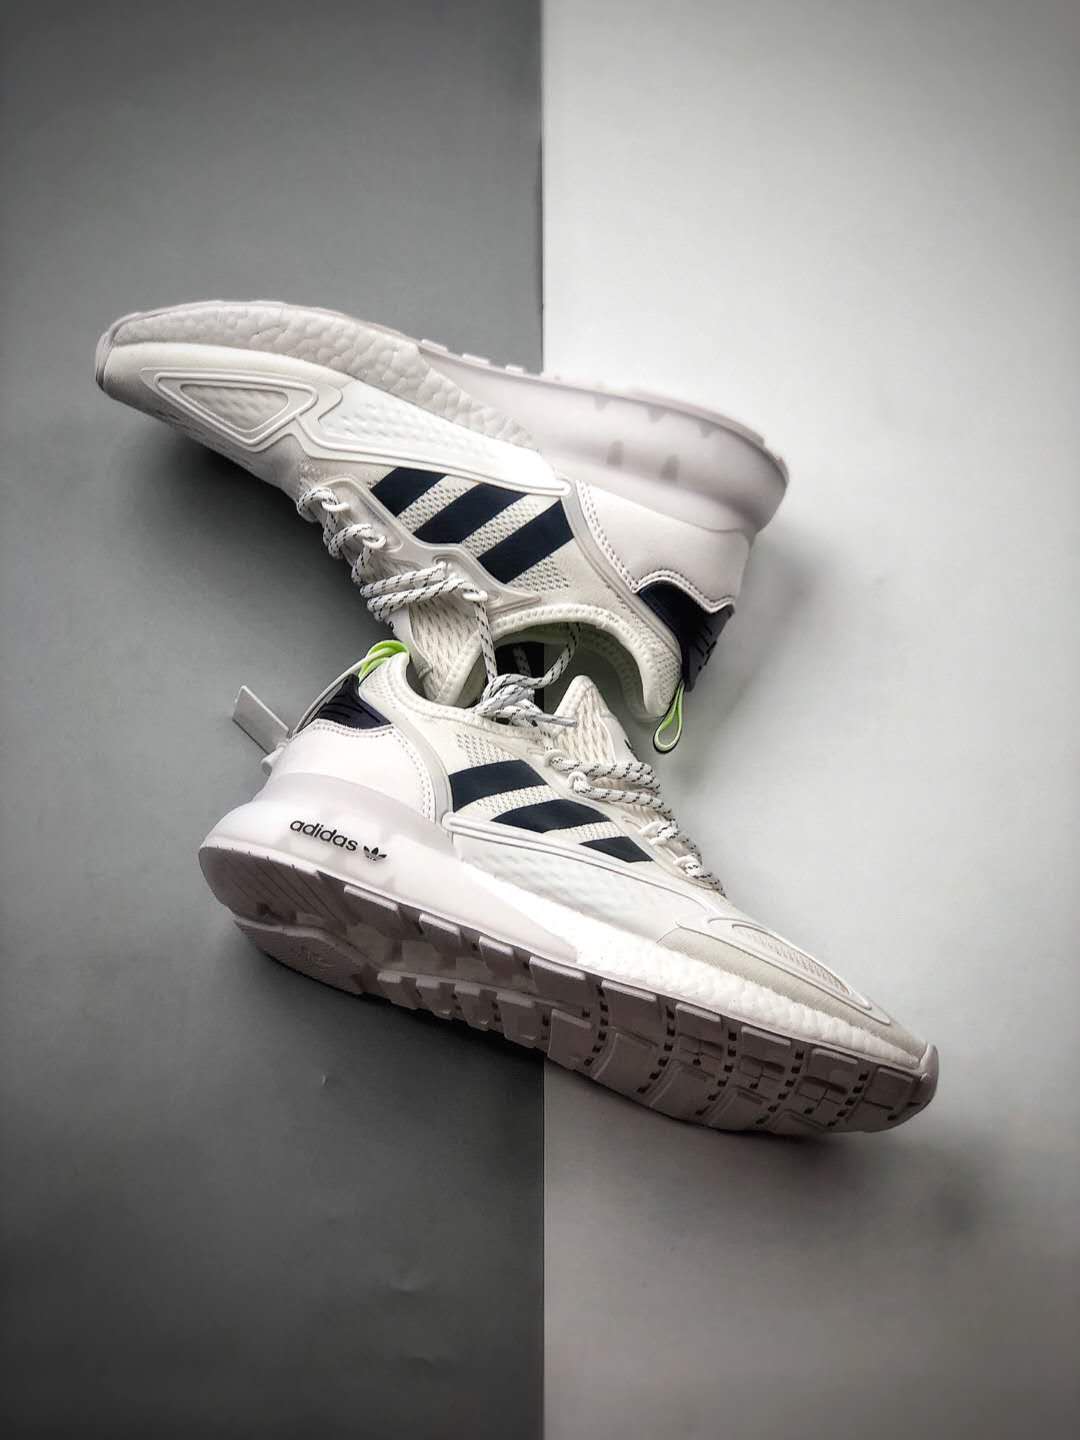 Adidas ZX 2K Boost 'White Black' FX8489 - Stylish and Comfortable Sneakers